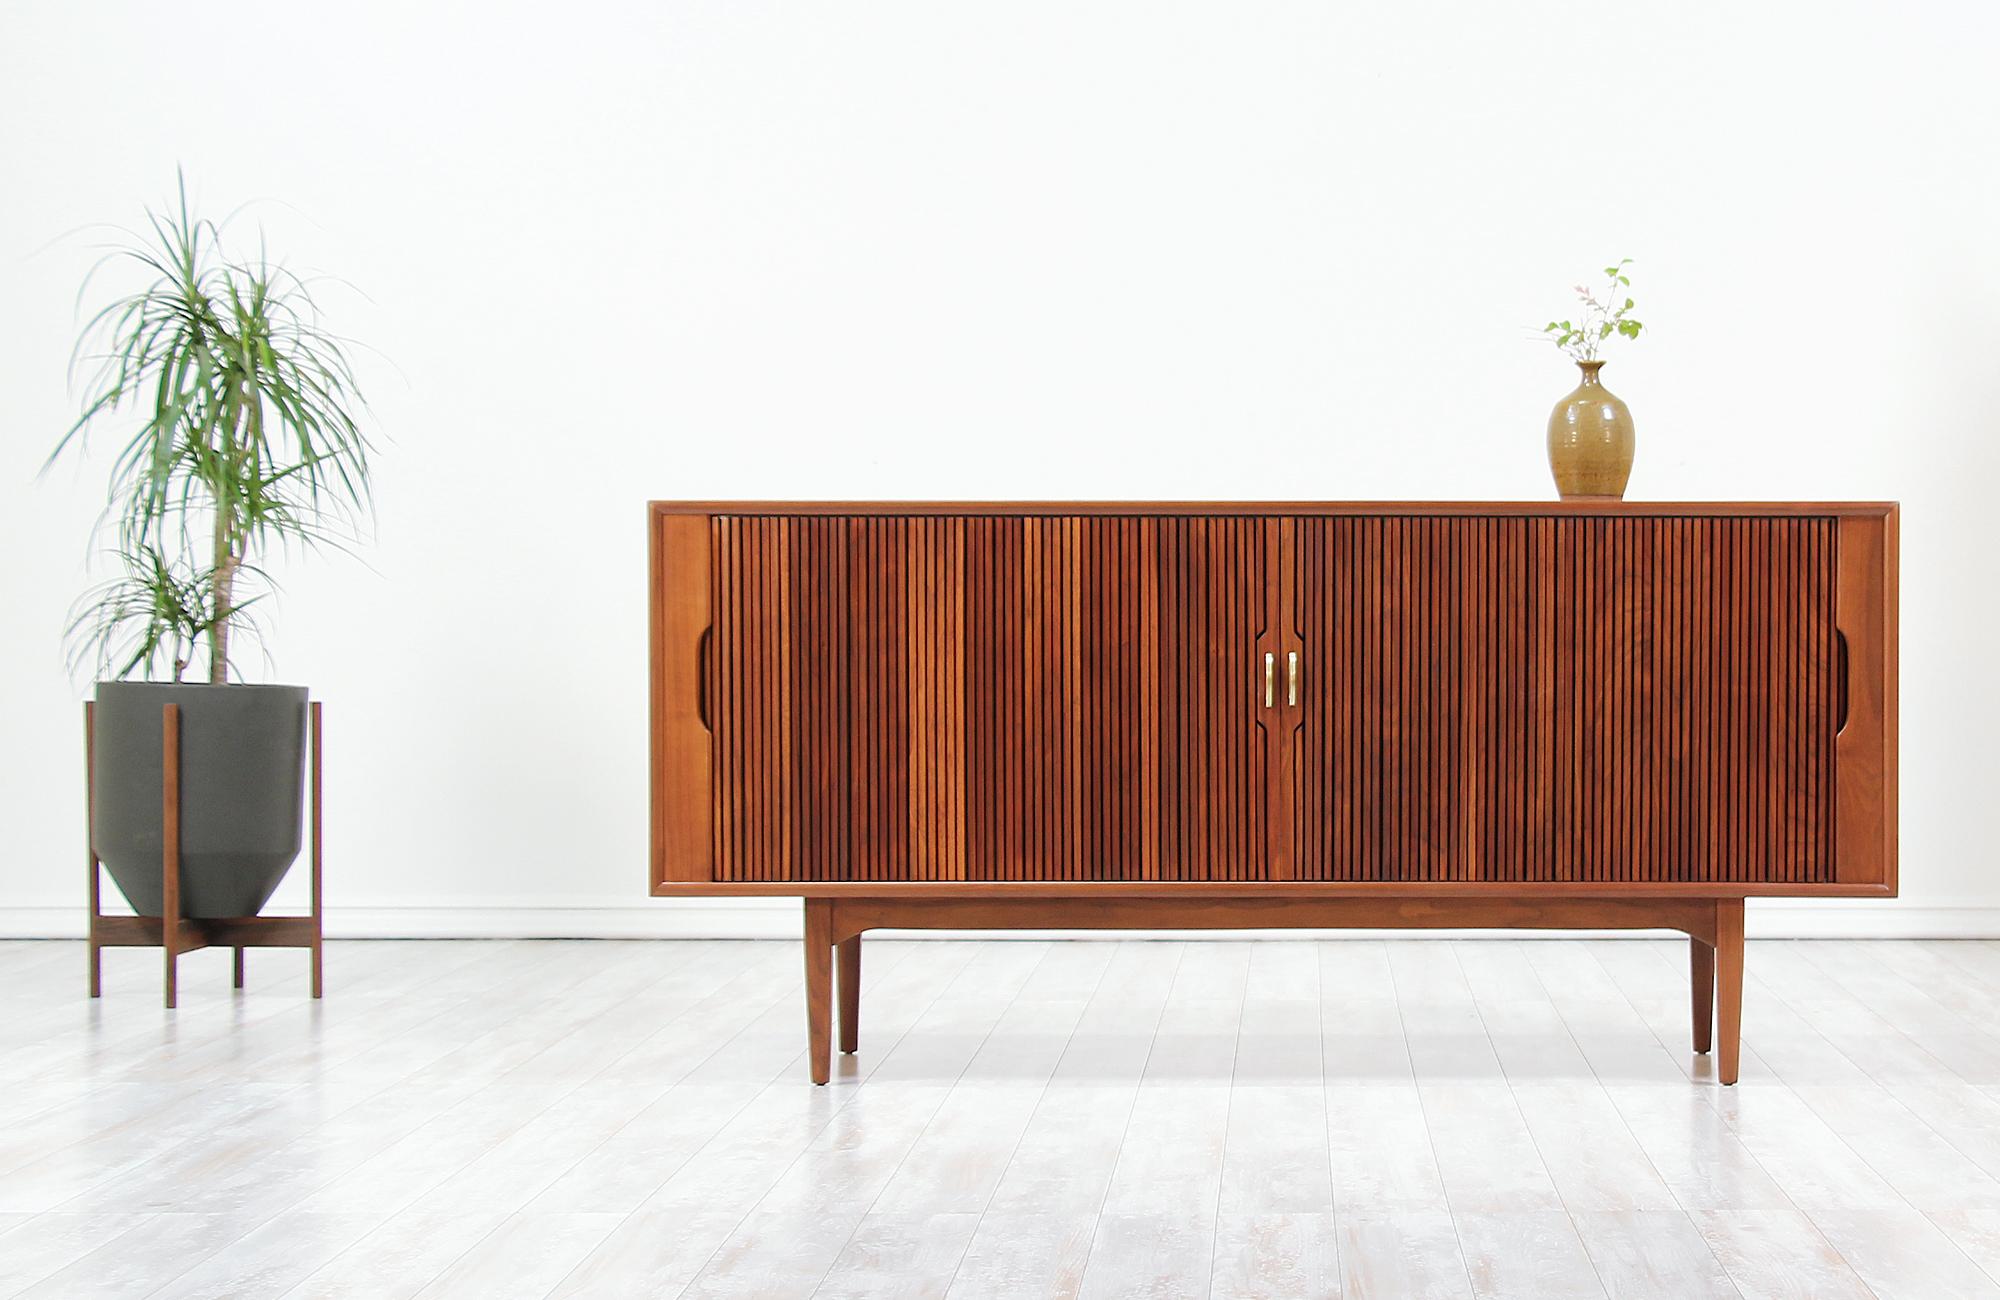 Mid-Century Modern tambour door credenza designed by Kipp Stewart & Stewart MacDougall for Drexel’s “Declaration” line in the United States, circa 1950s. This Fine credenza features a walnut wood frame with a beautiful grain detail and smooth